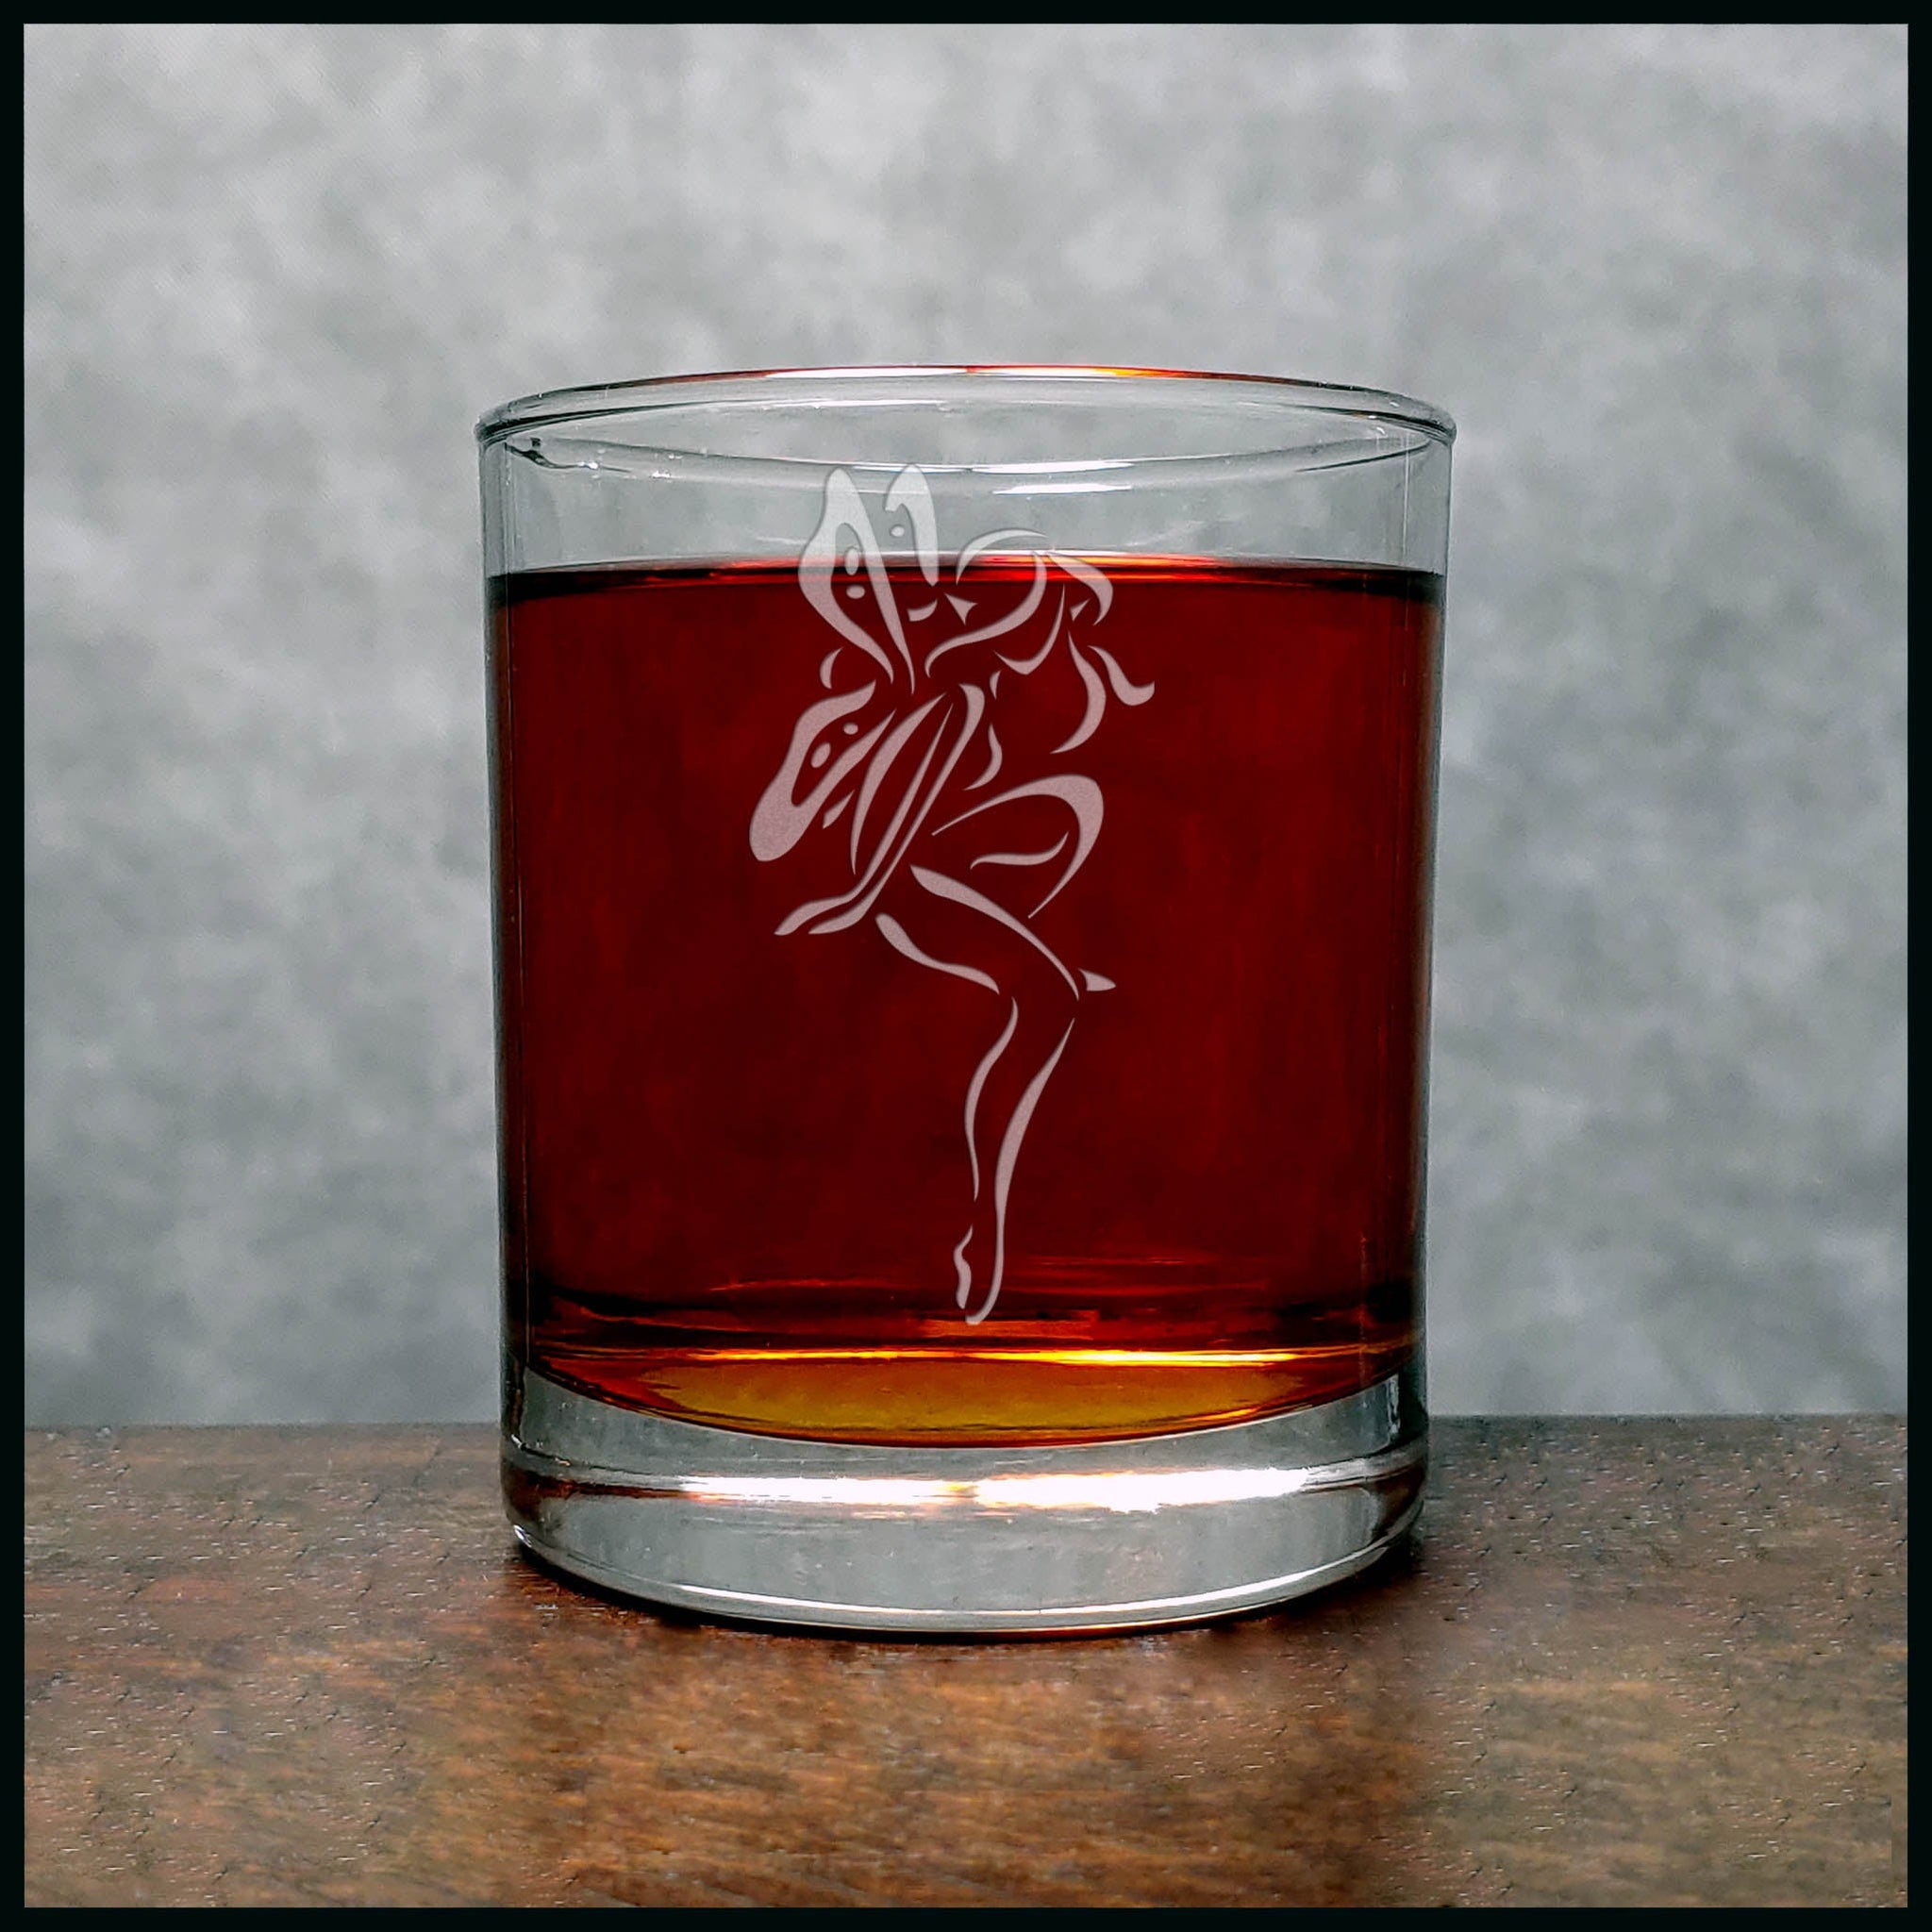 Fairy Personalized Whisky Glass - Design 5 - Copyright Hues in Glass